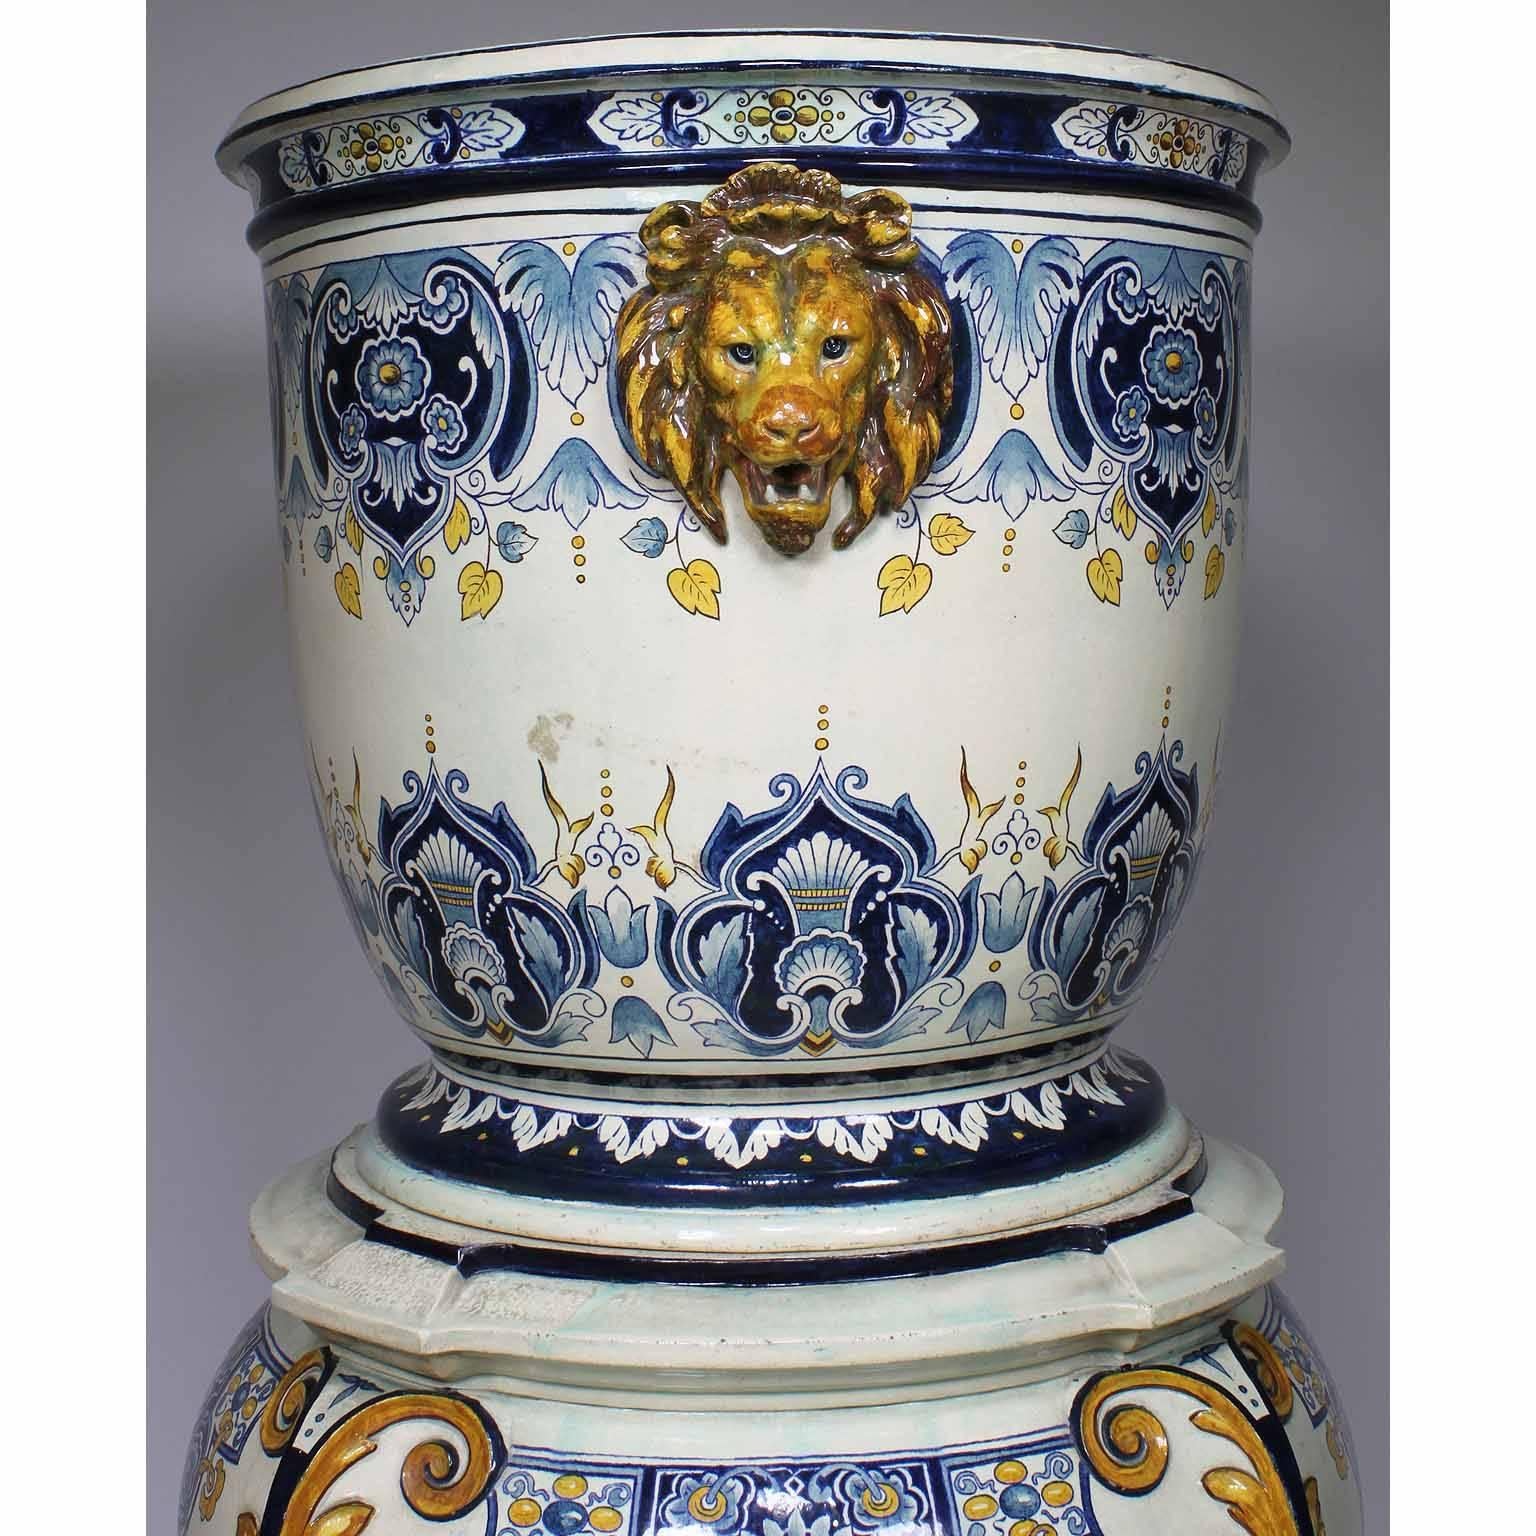 Glazed German 19th Century Neoclassical Revival Majolica Jardinière Planter on Stand